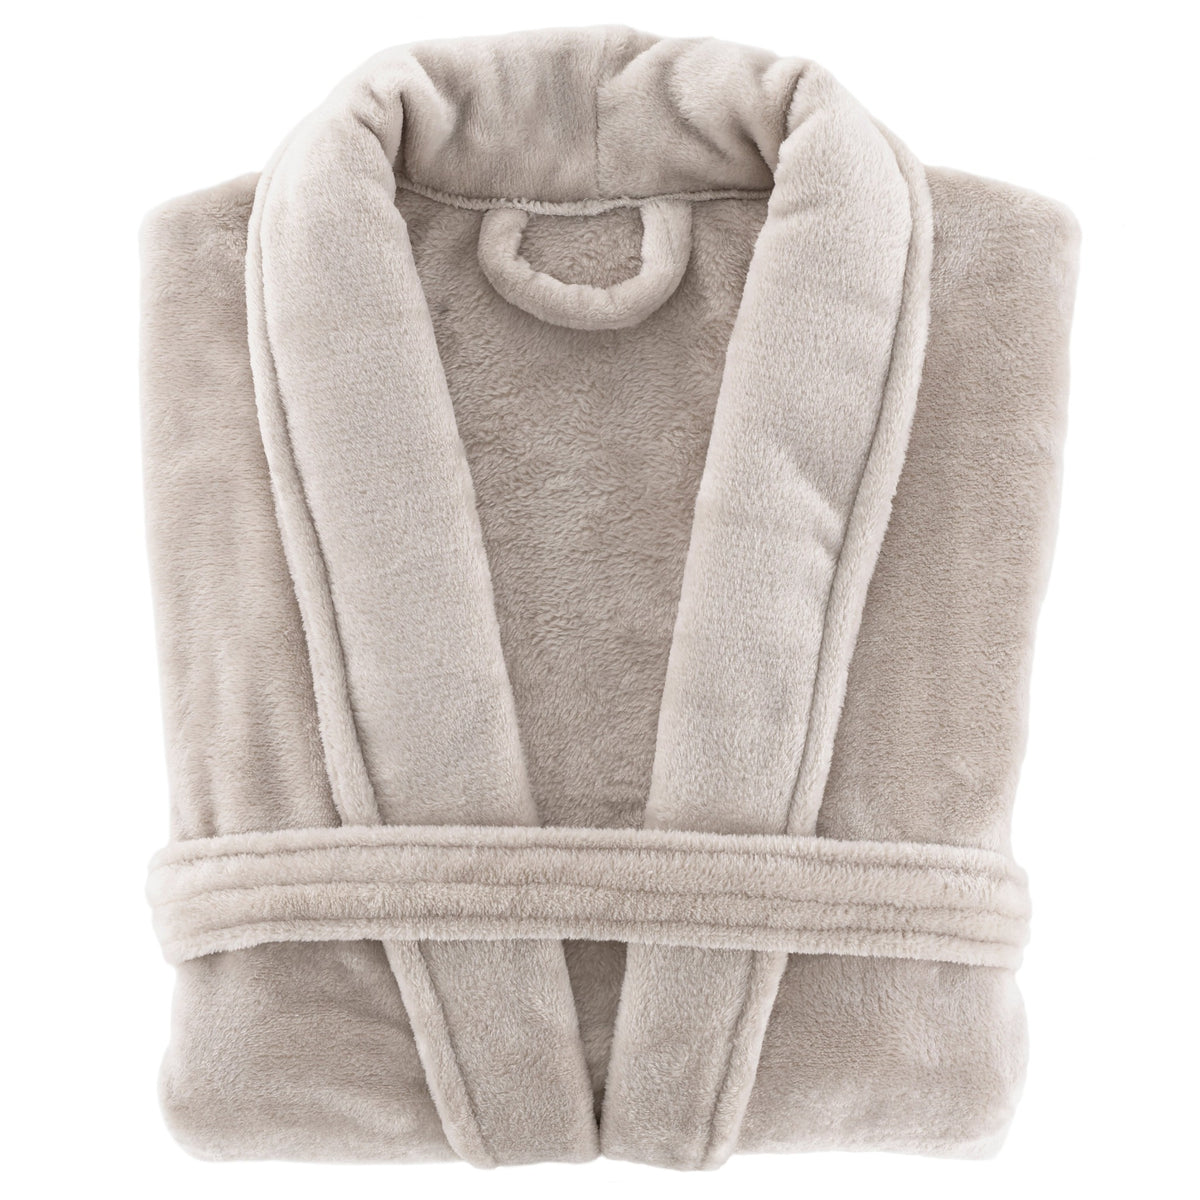 Folded Image of Pine Cone Hill Sheepy Fleece 2.0 Robe in Color Dove Grey